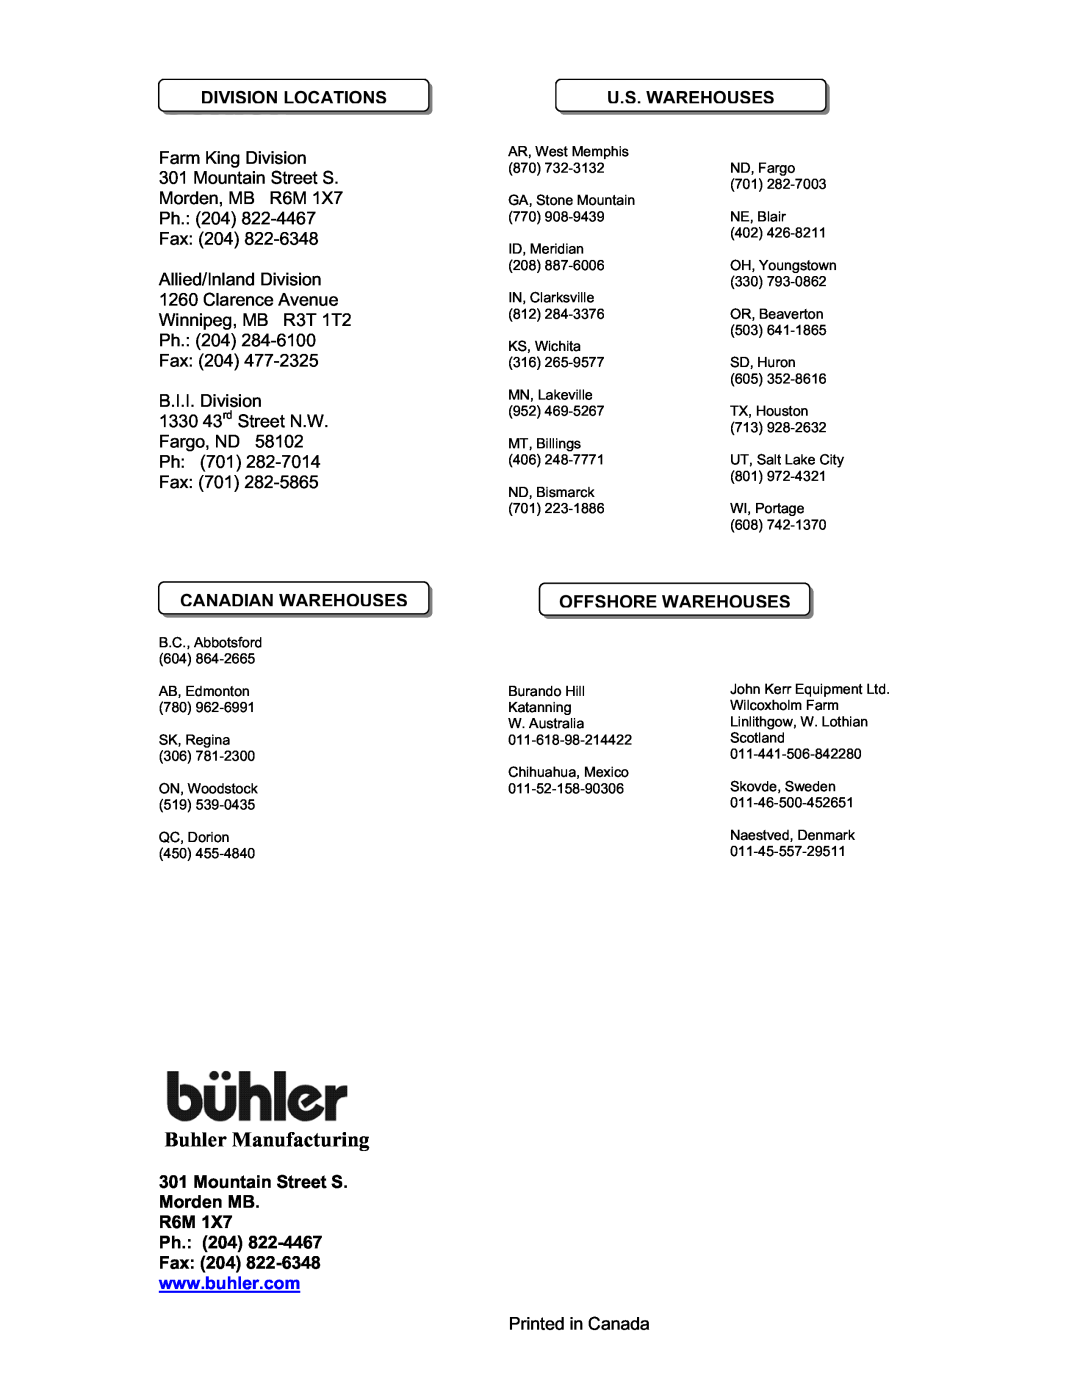 Buhler FK369 manual Buhler Manufacturing, Division Locations, Farm King Division 301 Mountain Street S Morden, MB R6M Ph 